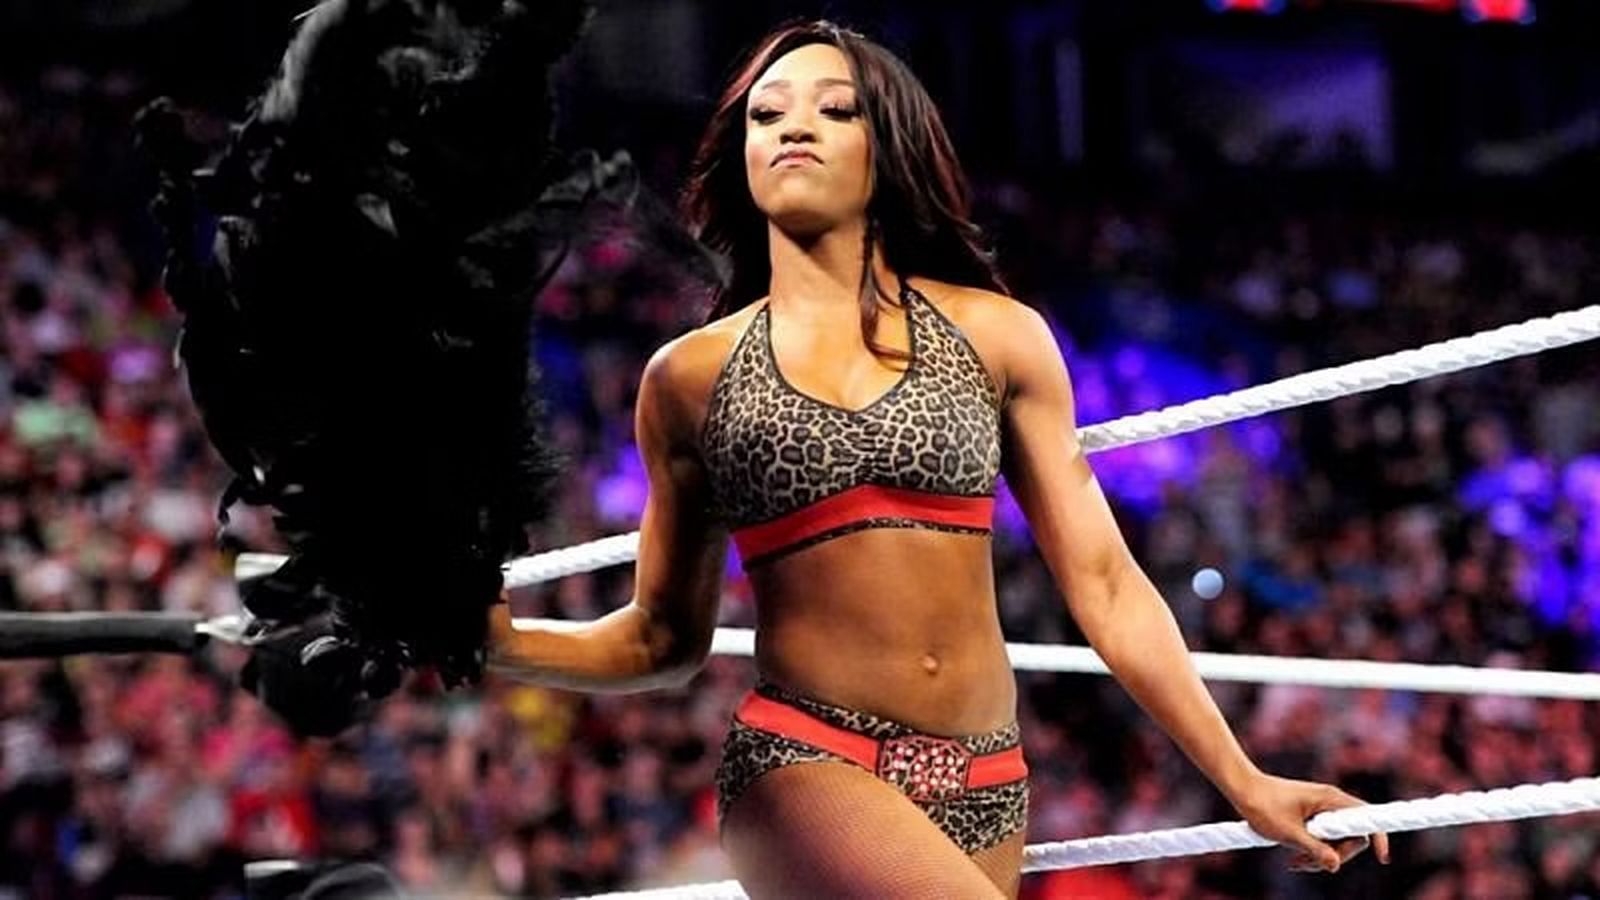 Alicia Fox has been seen with a new look